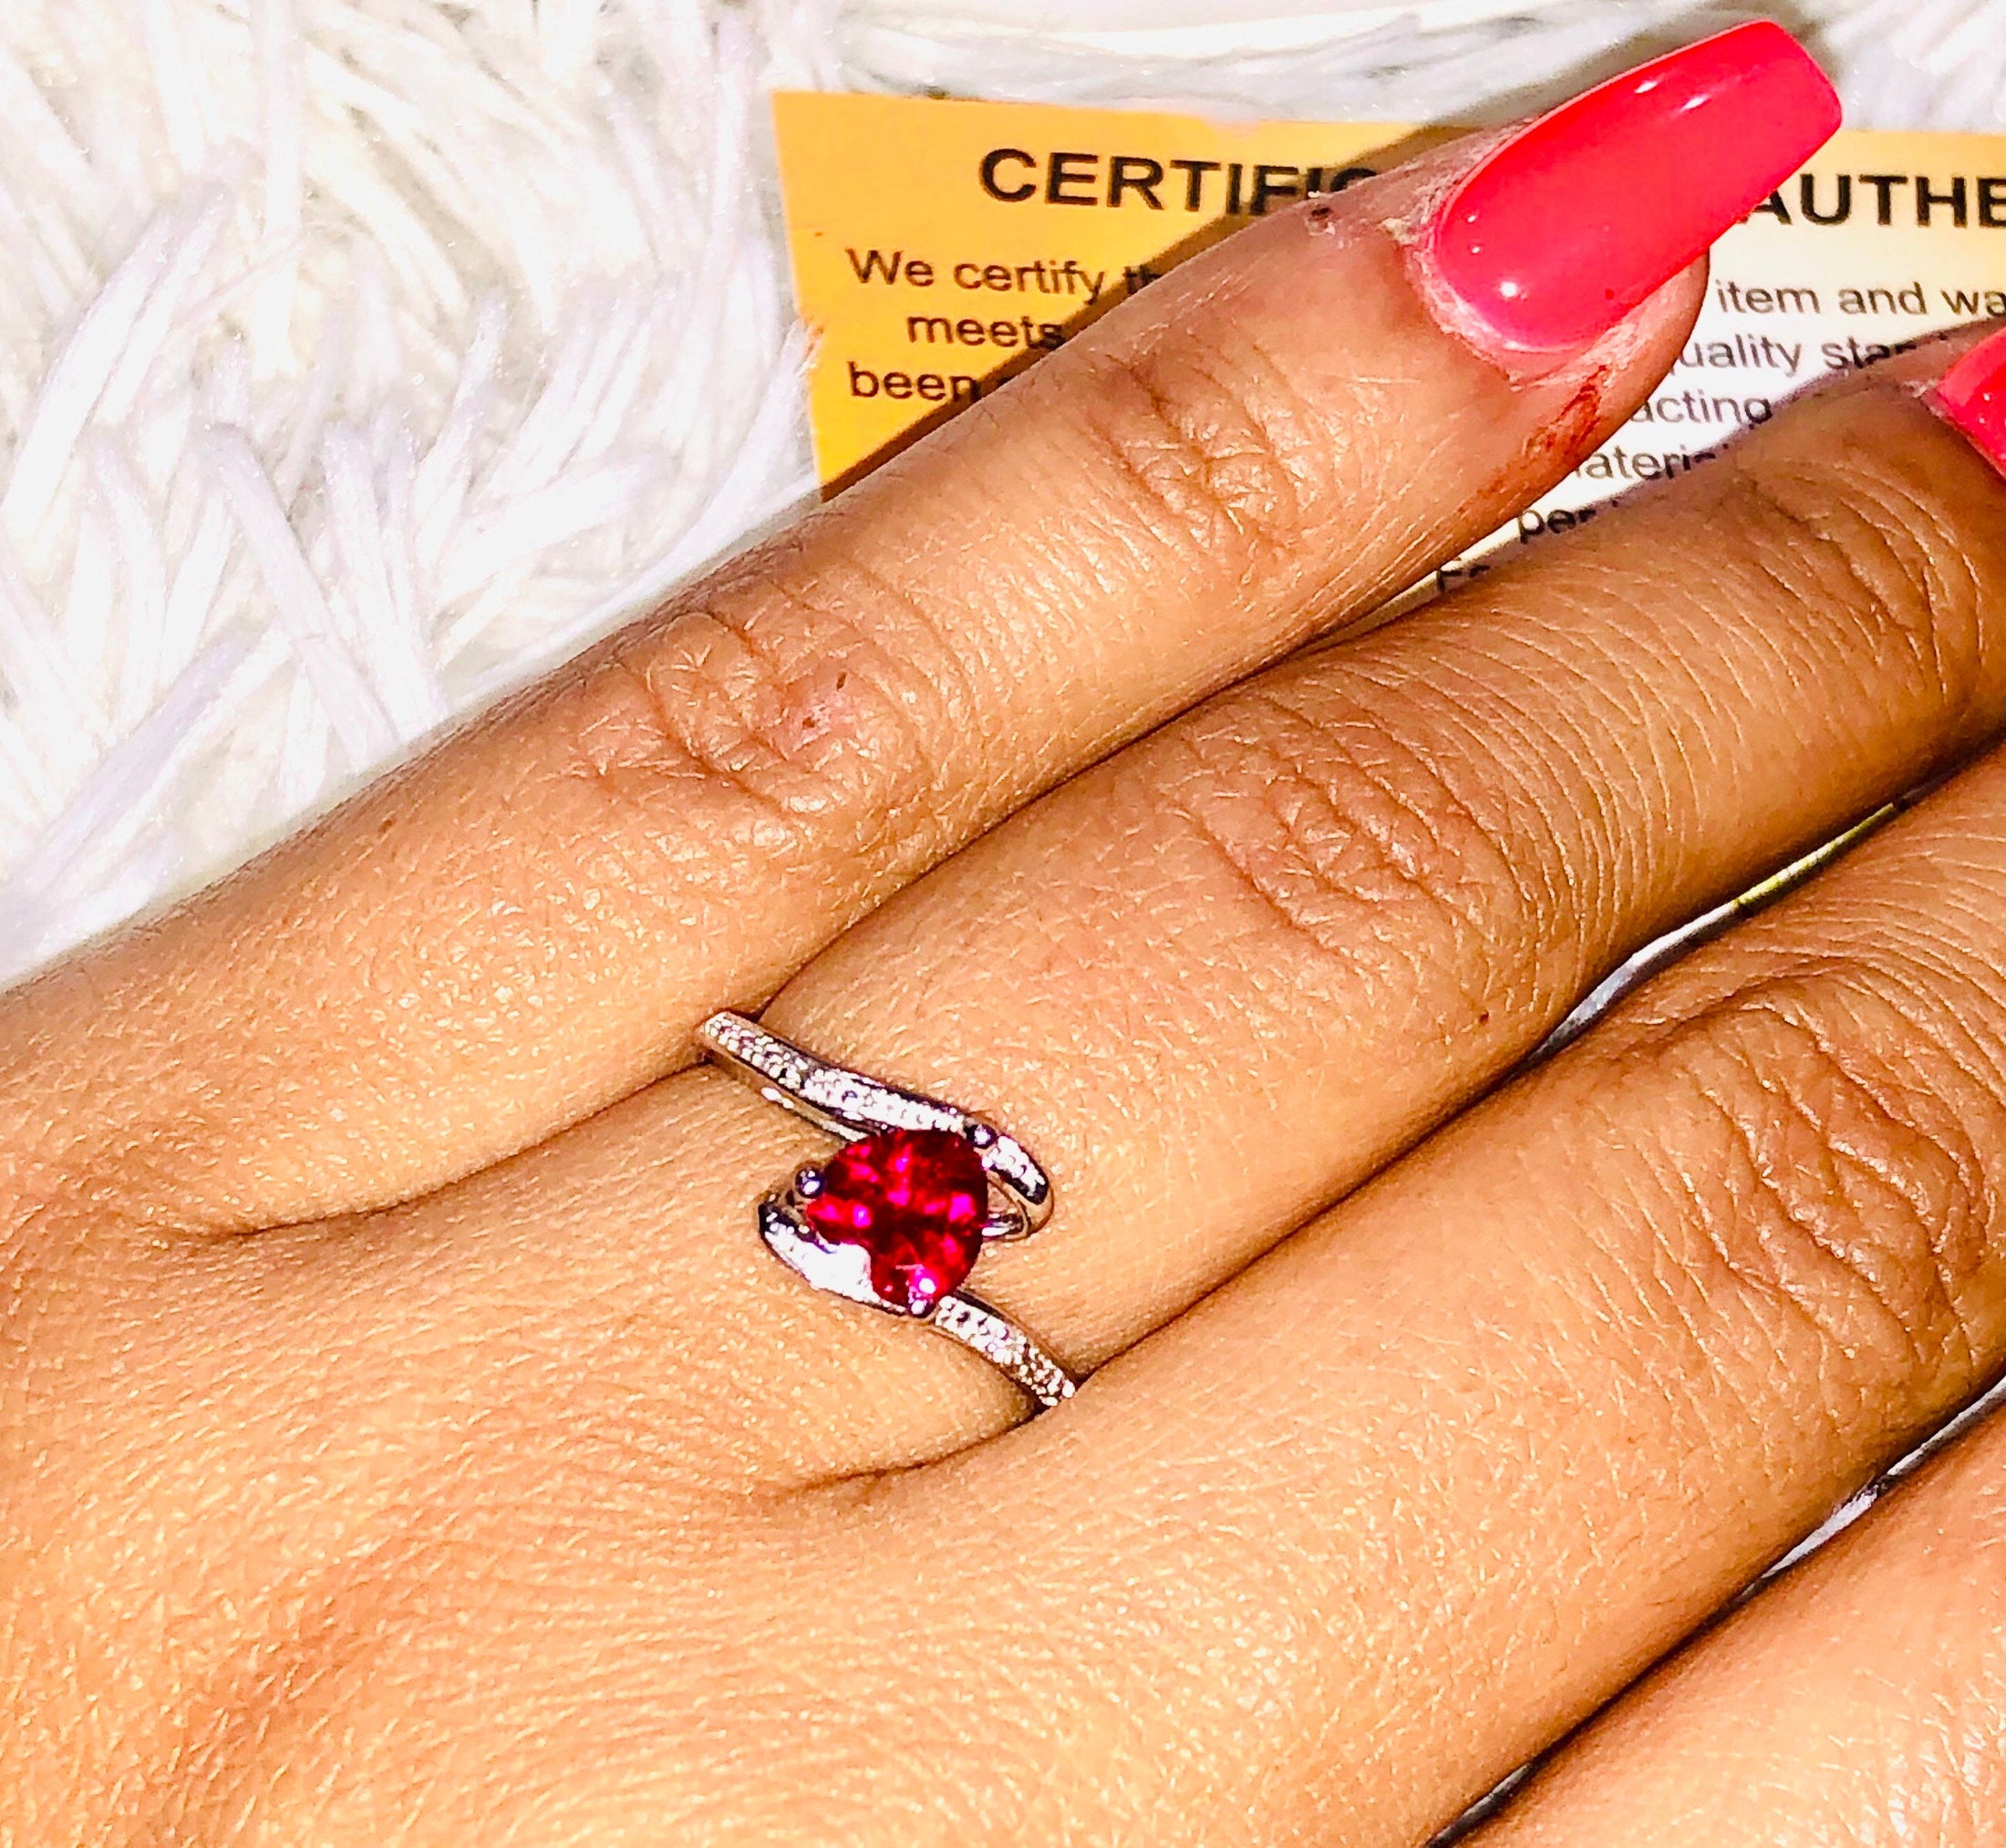 Real Diamond Ring For Women, Ruby birthstone ring, genuine natural diamond gift ring for her, gifts for her, anniversary gifts for her, SALE